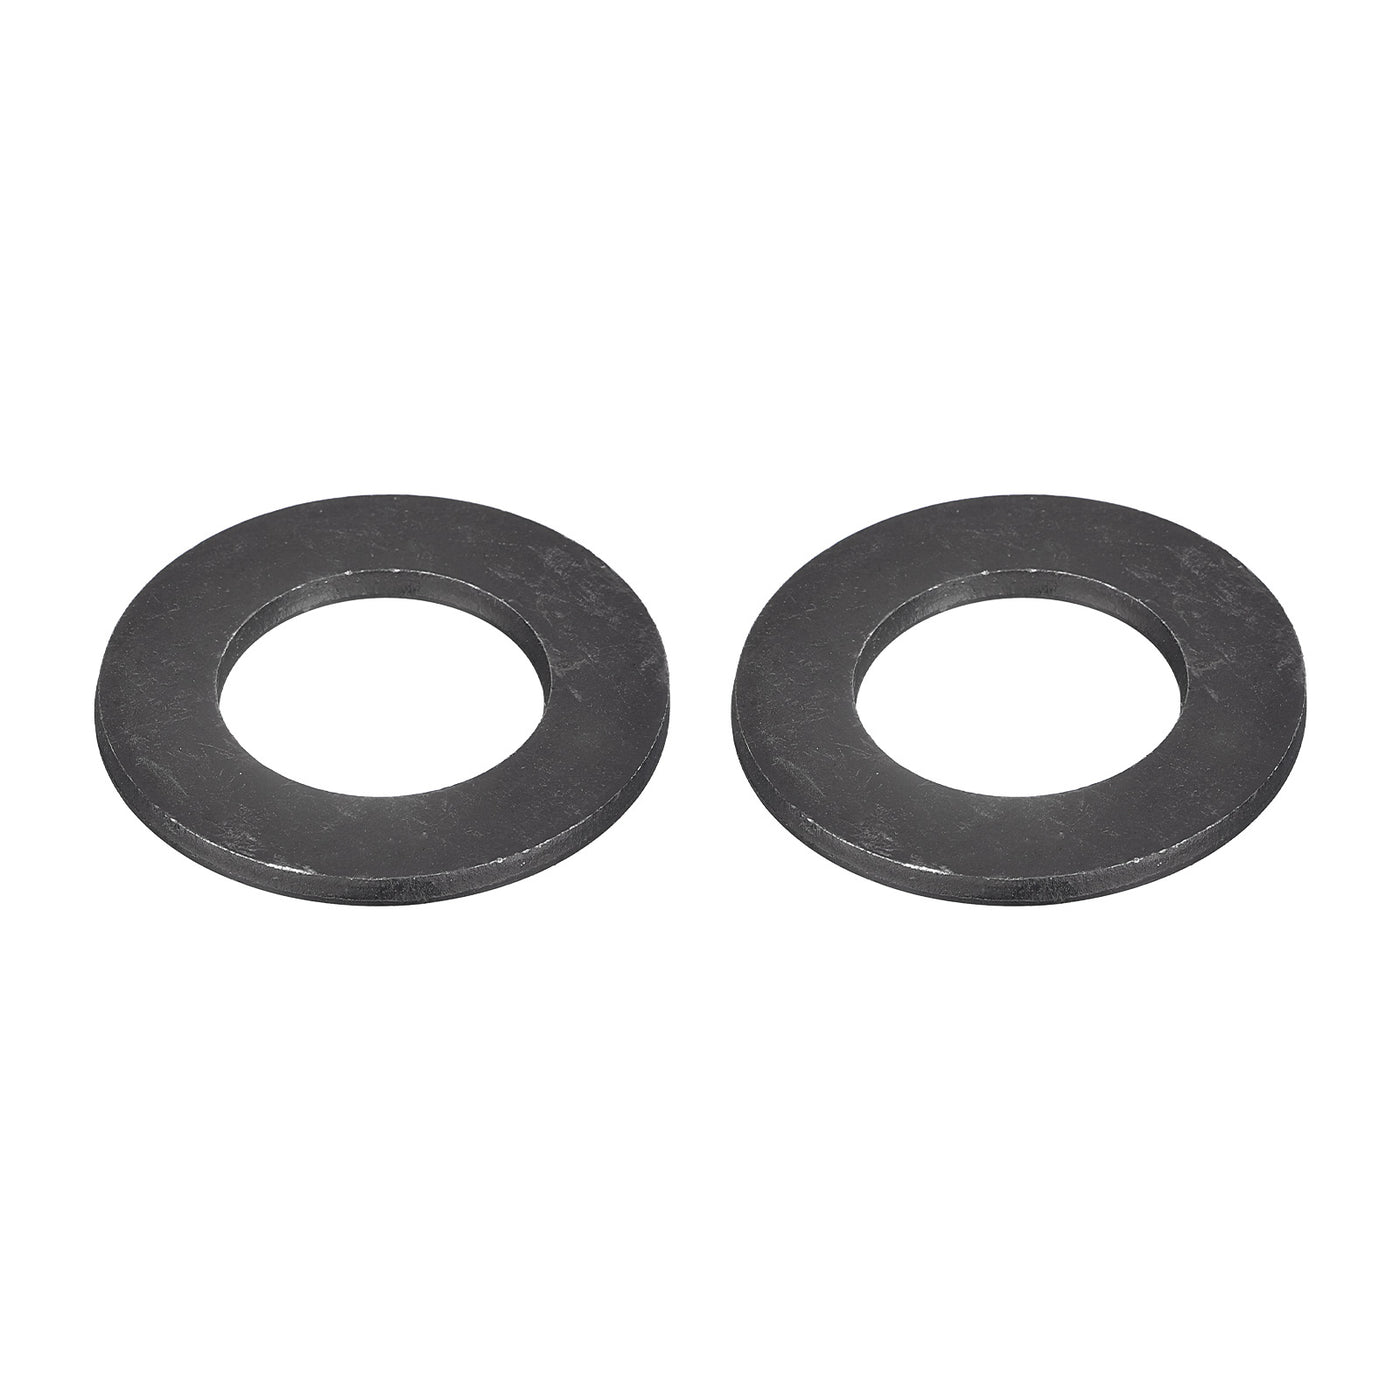 uxcell Uxcell M30 Carbon Steel Flat Washer 2pcs 31x55.6x3.8mm Grade 8.8 Alloy Steel Fasteners